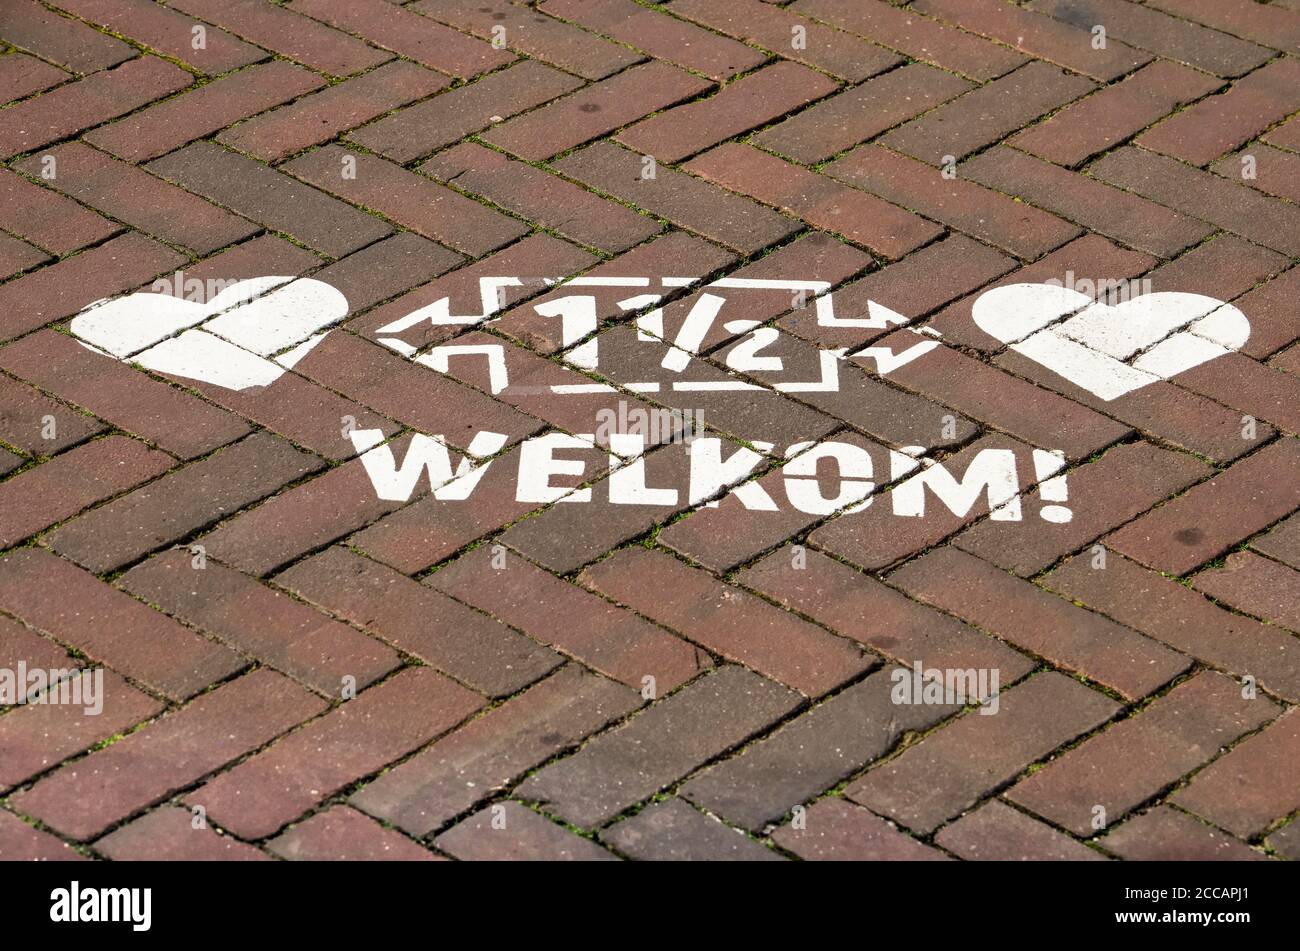 Kampen, The Netherlands, July 26, 2020: the 1,5 metre distance rule to prevent spreading of covid-19, painted in white on the pavement, with the word Stock Photo